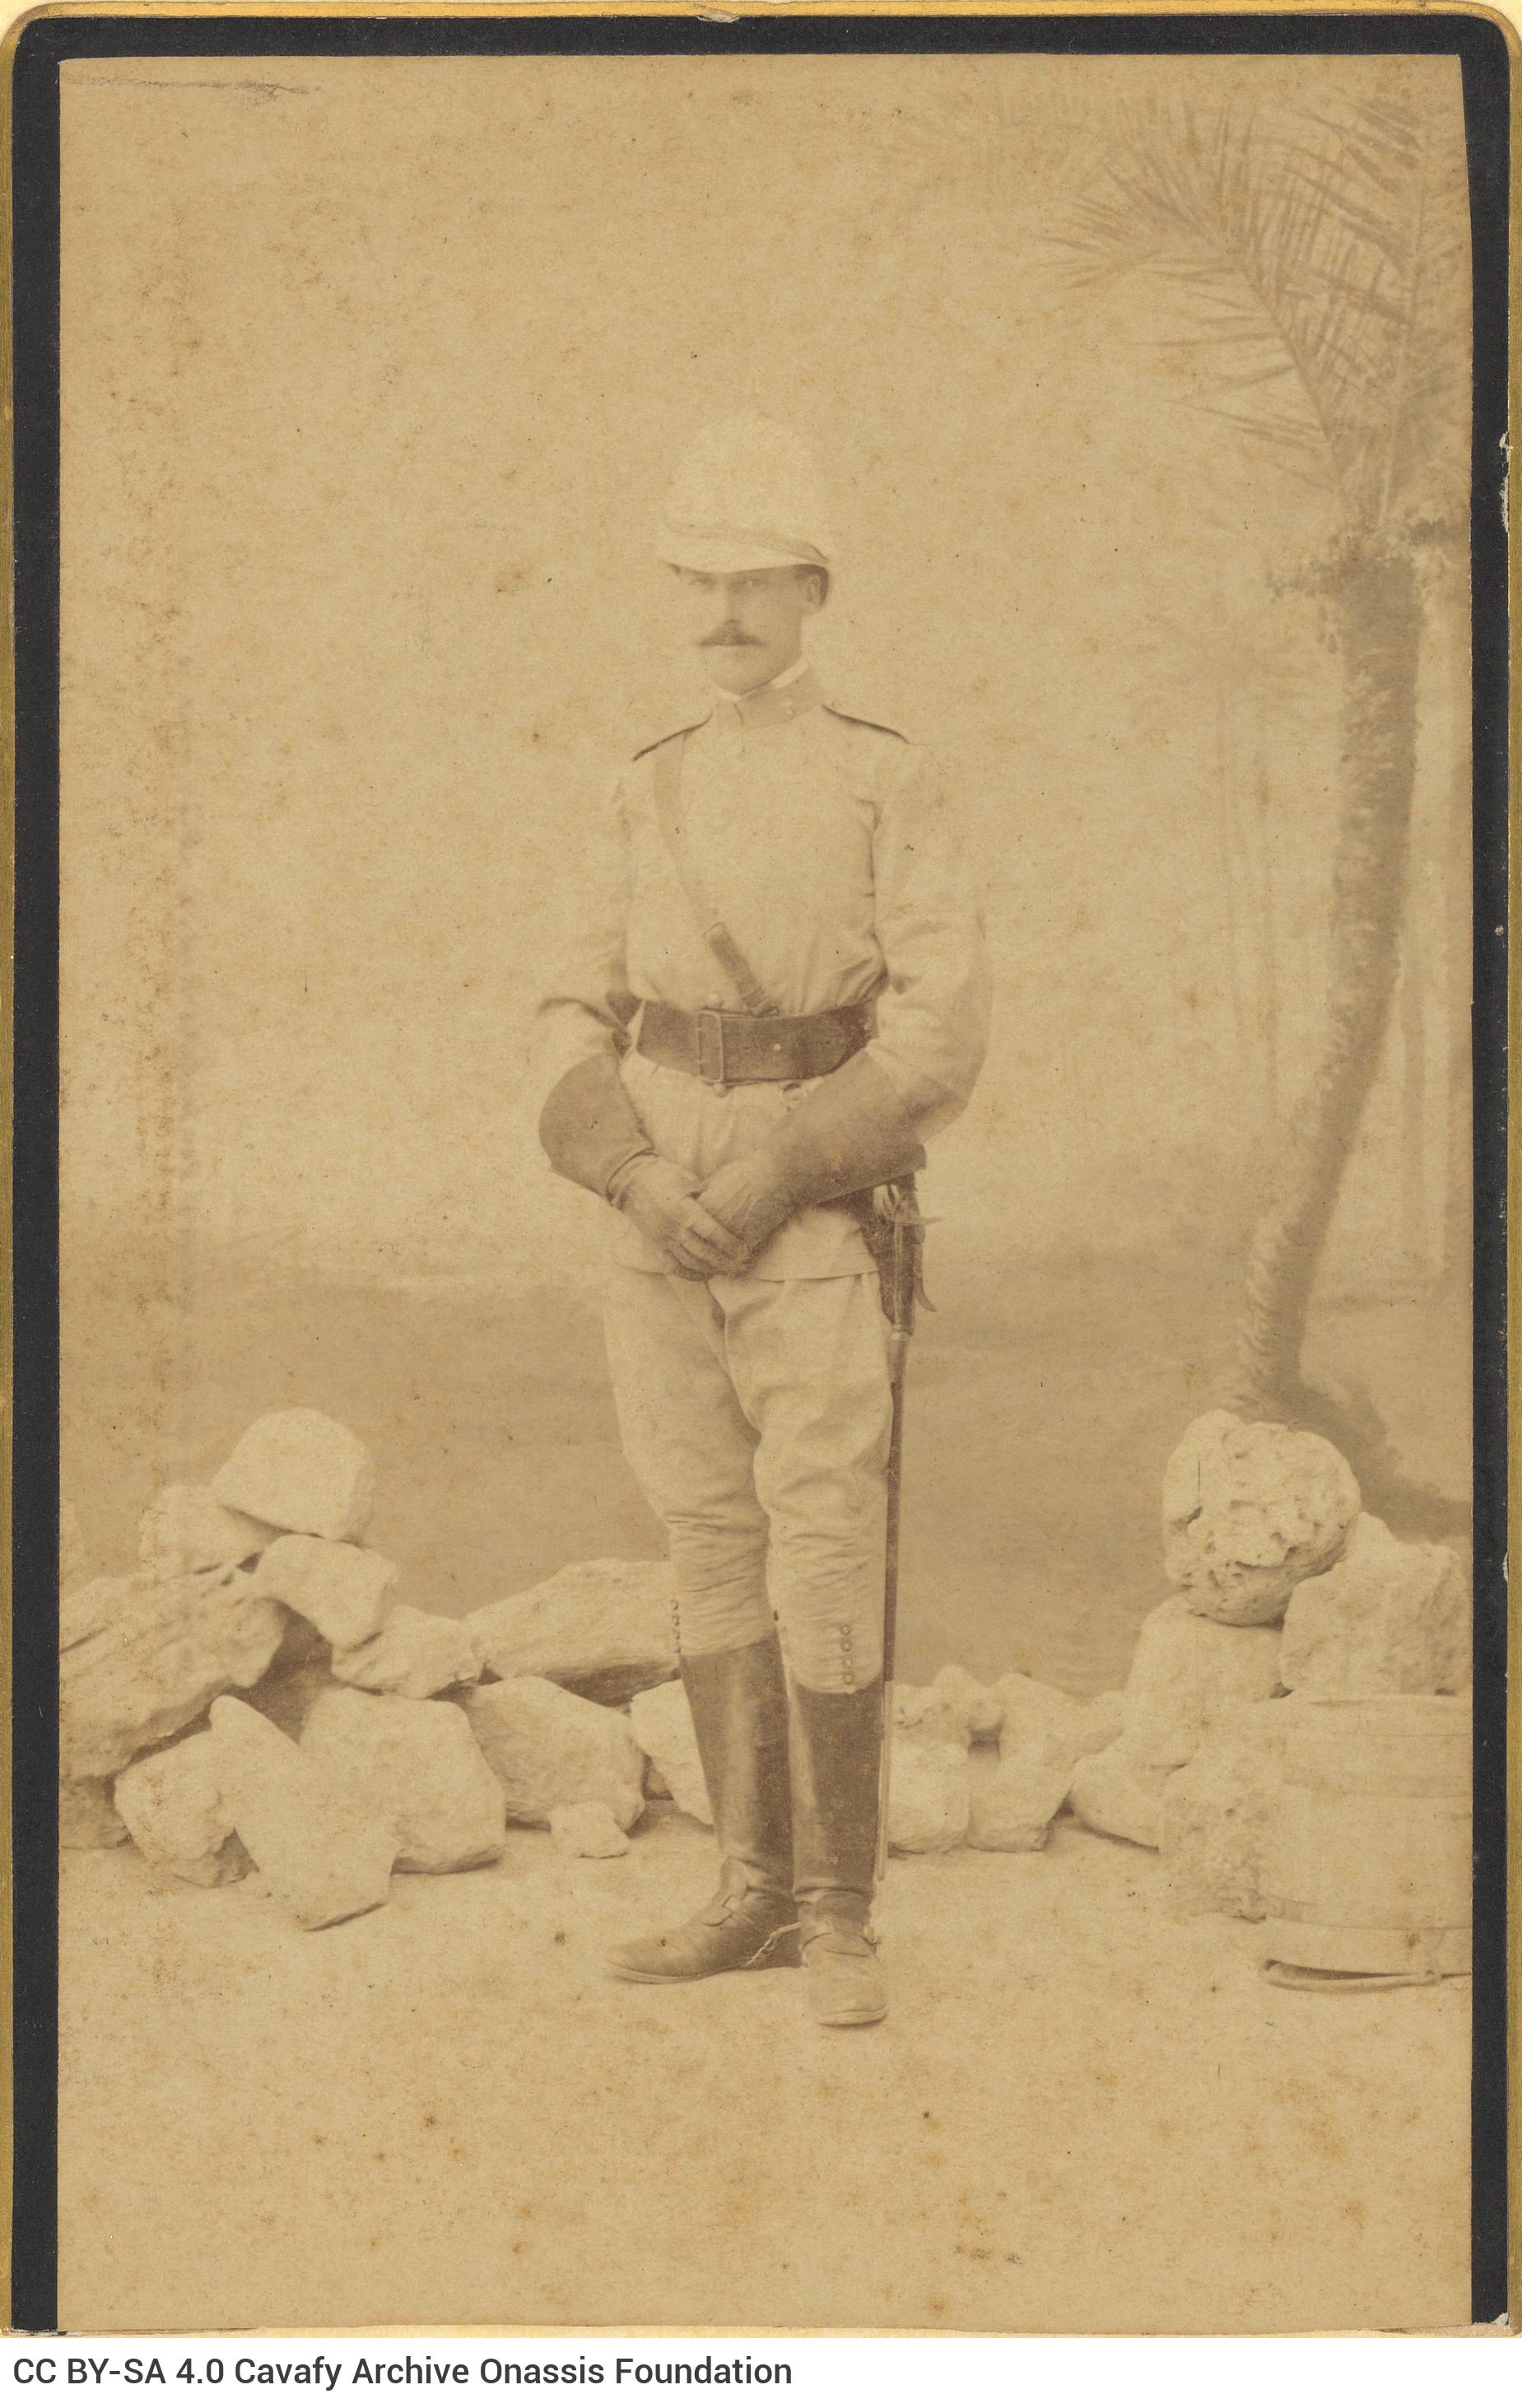 Photograph portrait of a standing man in a military uniform and colonial hat. He is wearing boots and gloves. The lower part 